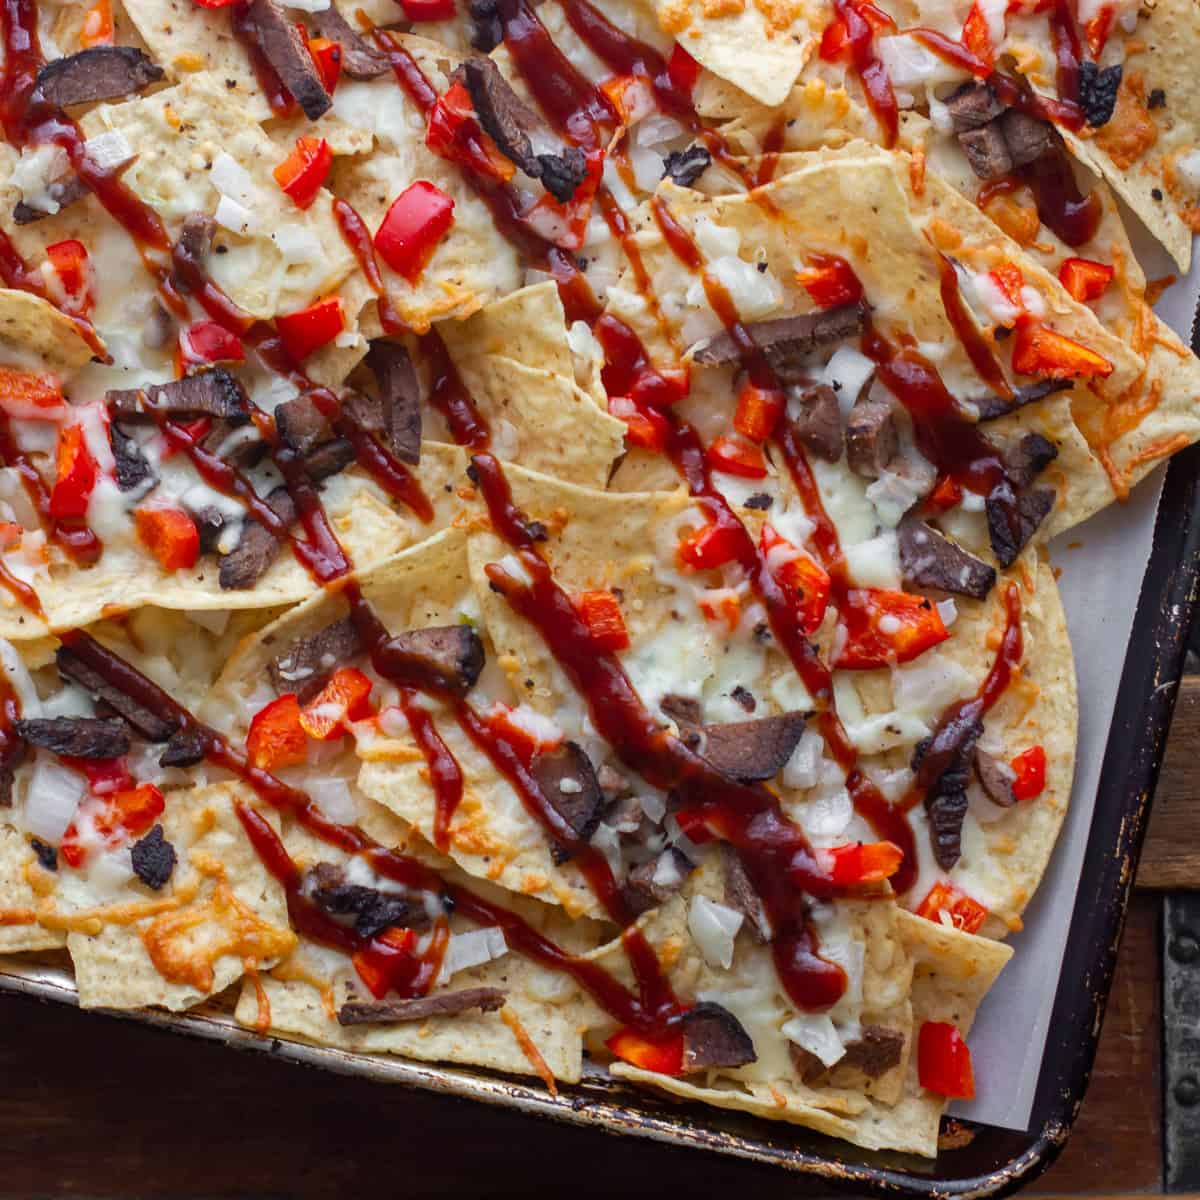 Smoked Brisket, provolone cheese, onions, peppers baked on tortilla chips with BBQ sauce. This simple party food is smokey and delicious! Or use leftover steak